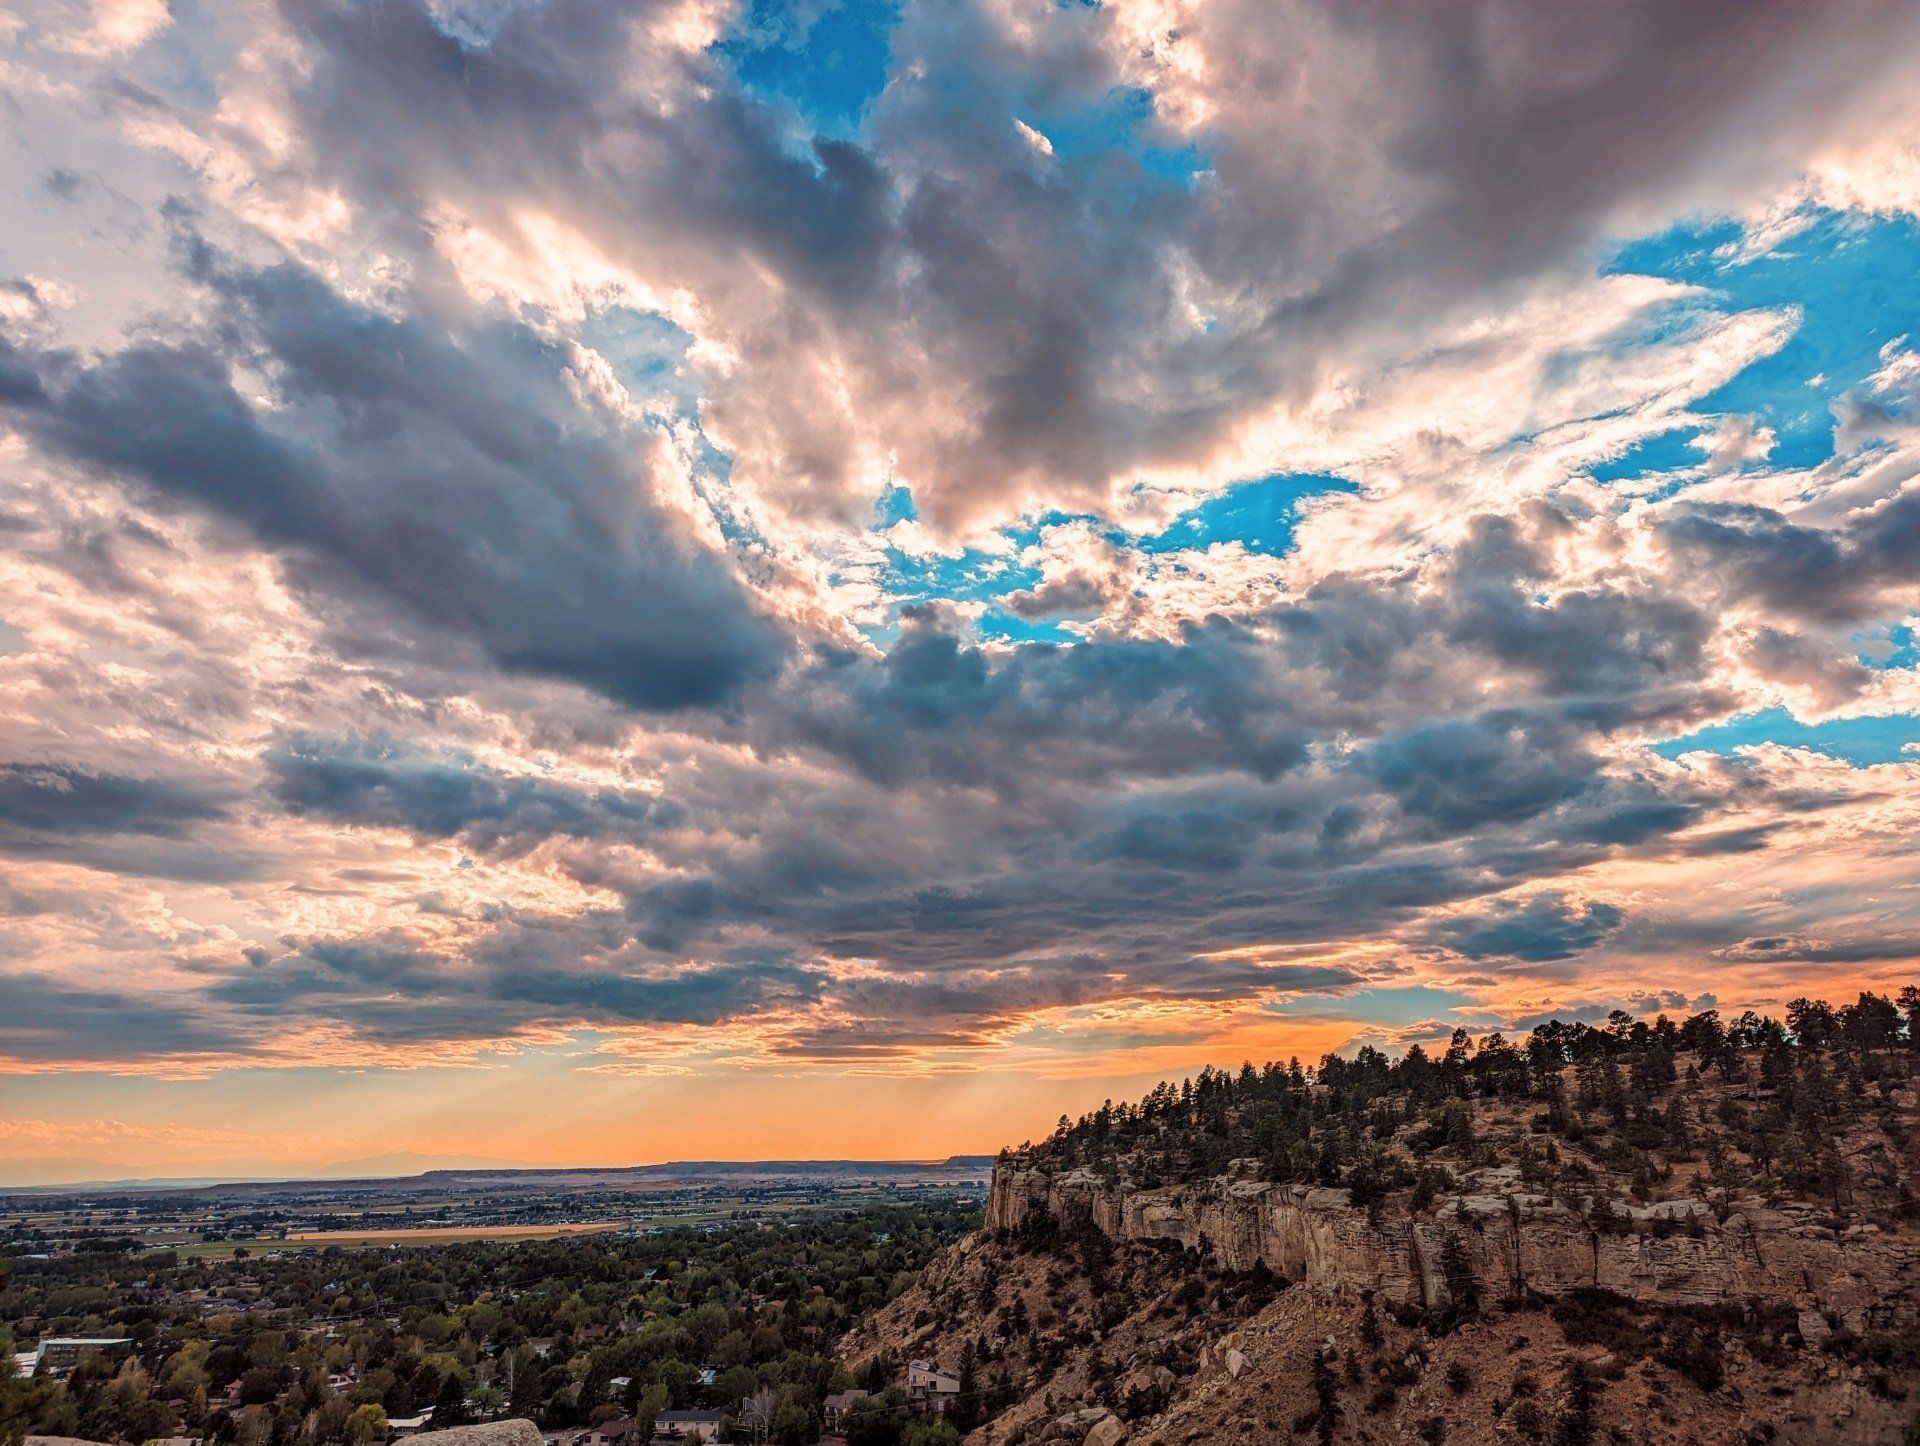 billings montana birds eye view sunset with clouds